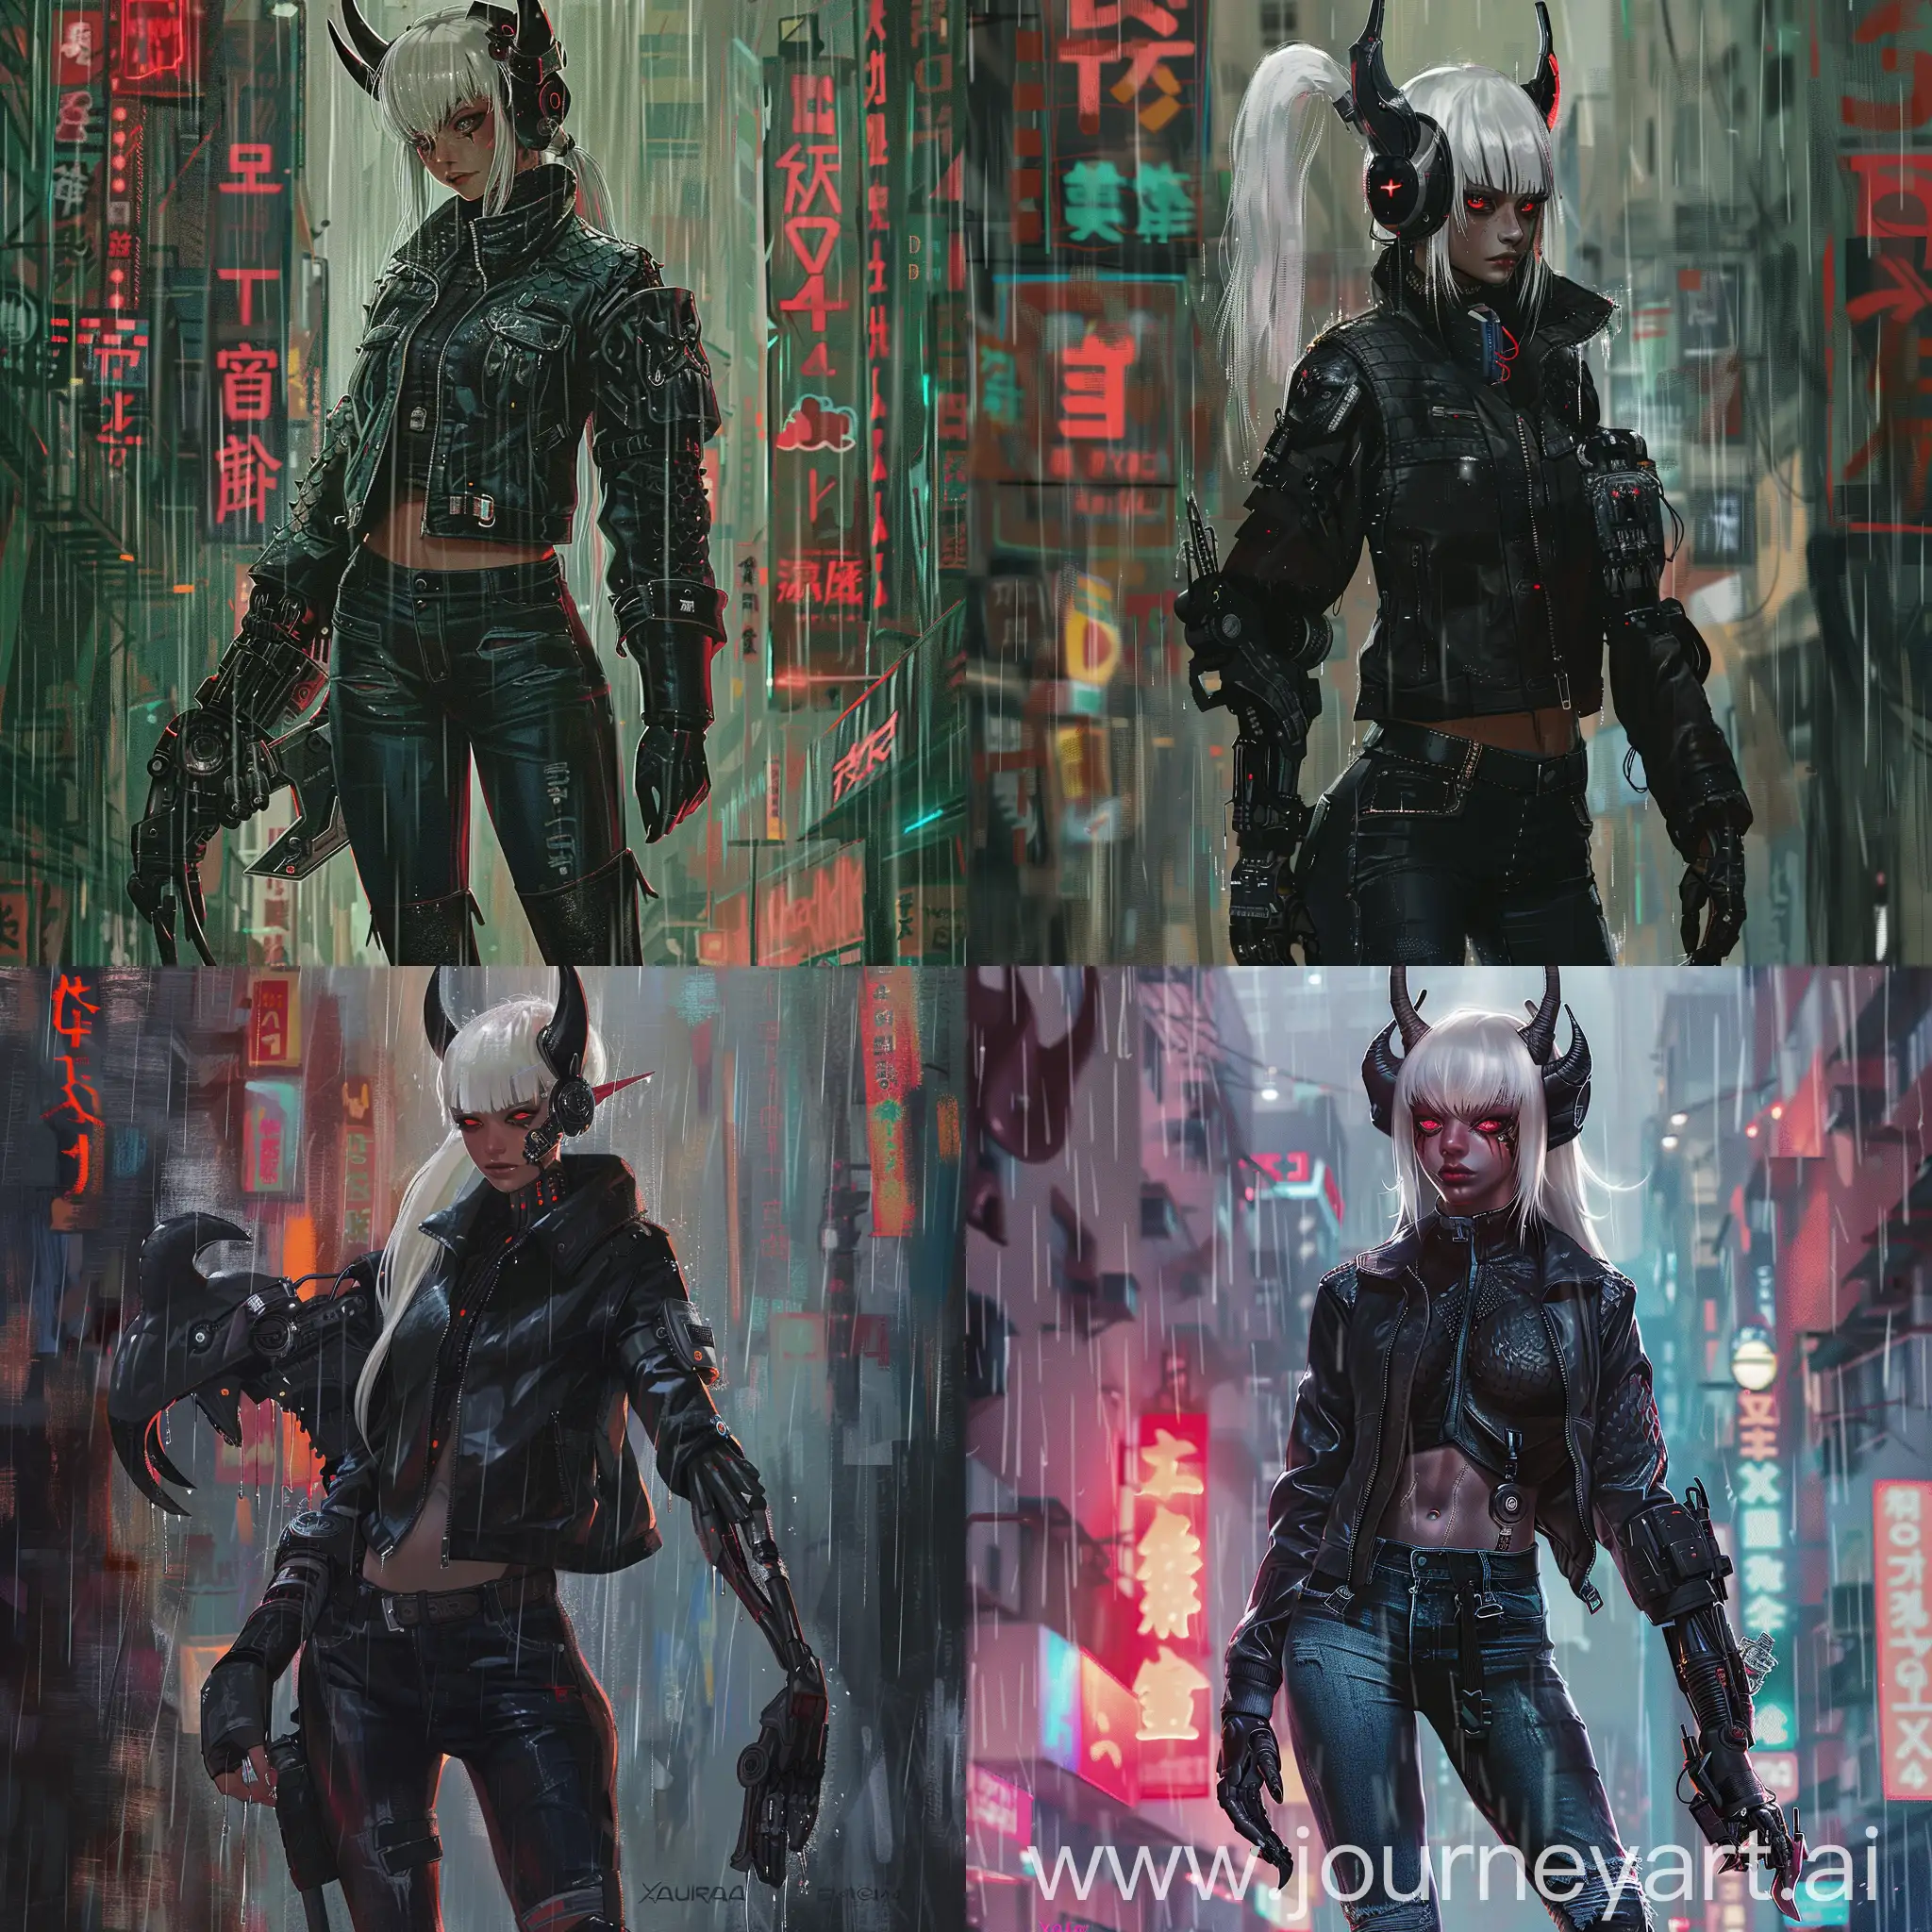 full portait, Au ra race, Xaela clan, female, face type 4, face scales, horns inward, white ponytail with bangs, black skin color, red eyes with black sclera, wearing black jacket black jeans black boots, robotic right arm, demon left arm, raining in the cyber city, chromatic abberation